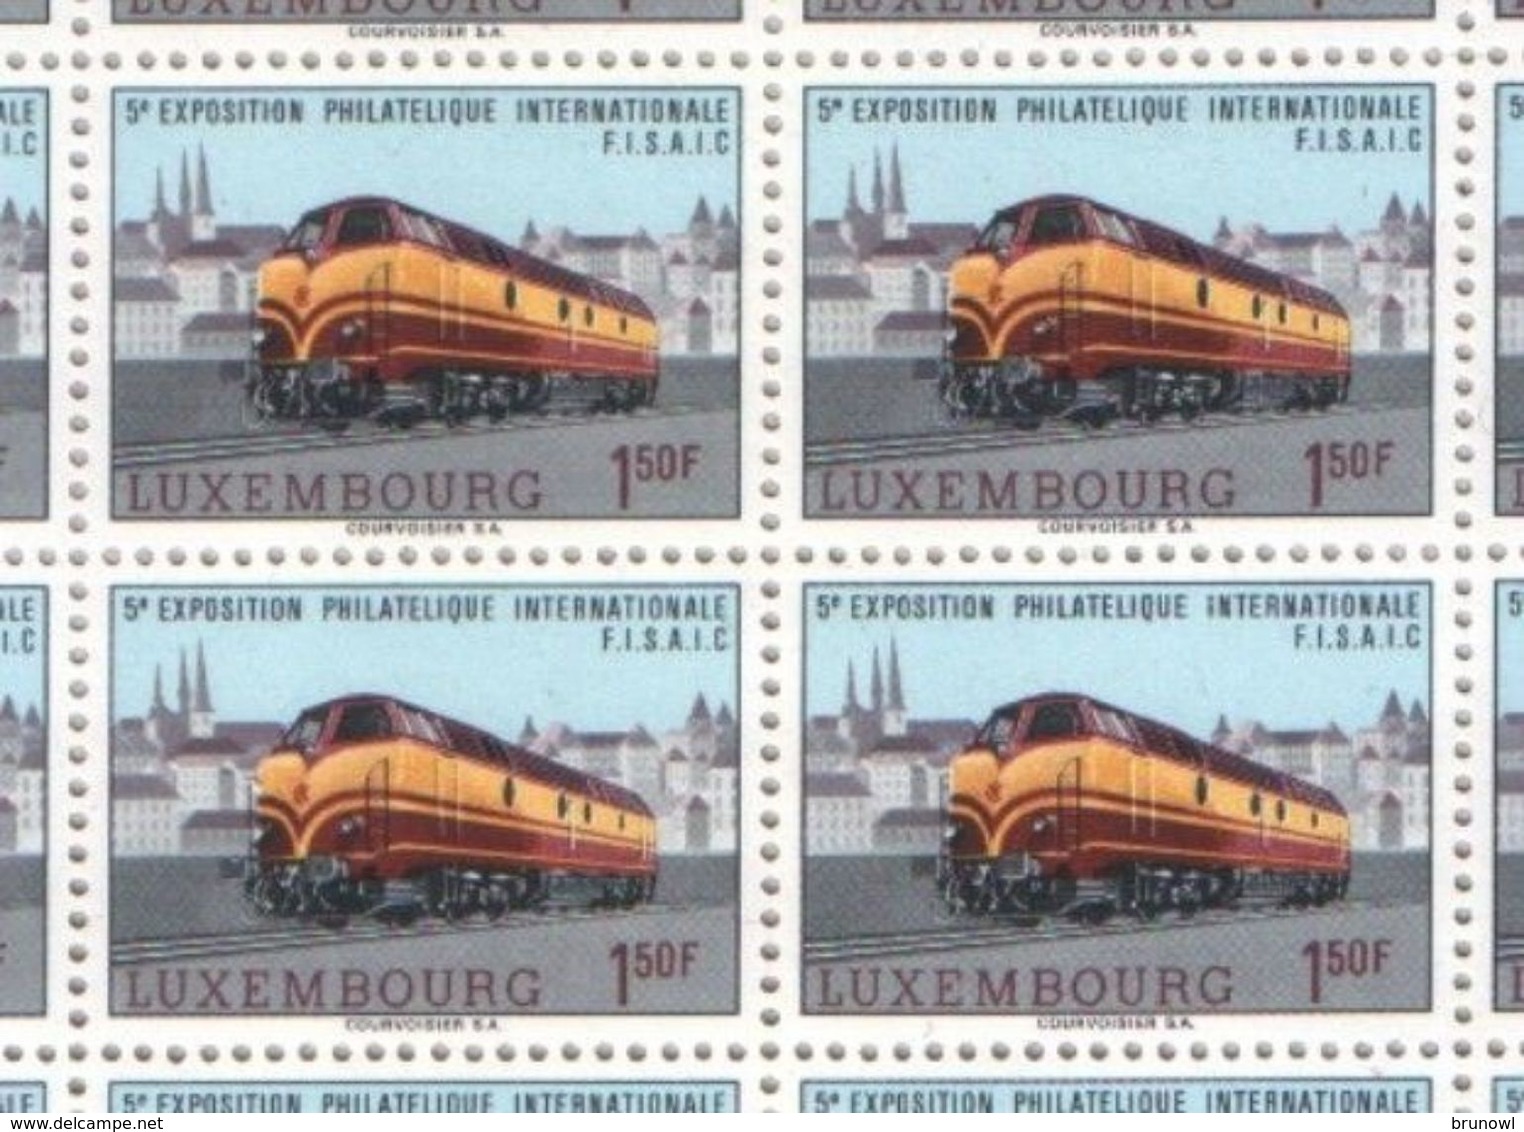 Luxembourg 1966 Two Sheets Of Philatelic Exhibition Stamps Featuring Trains MNH - Volledige Vellen